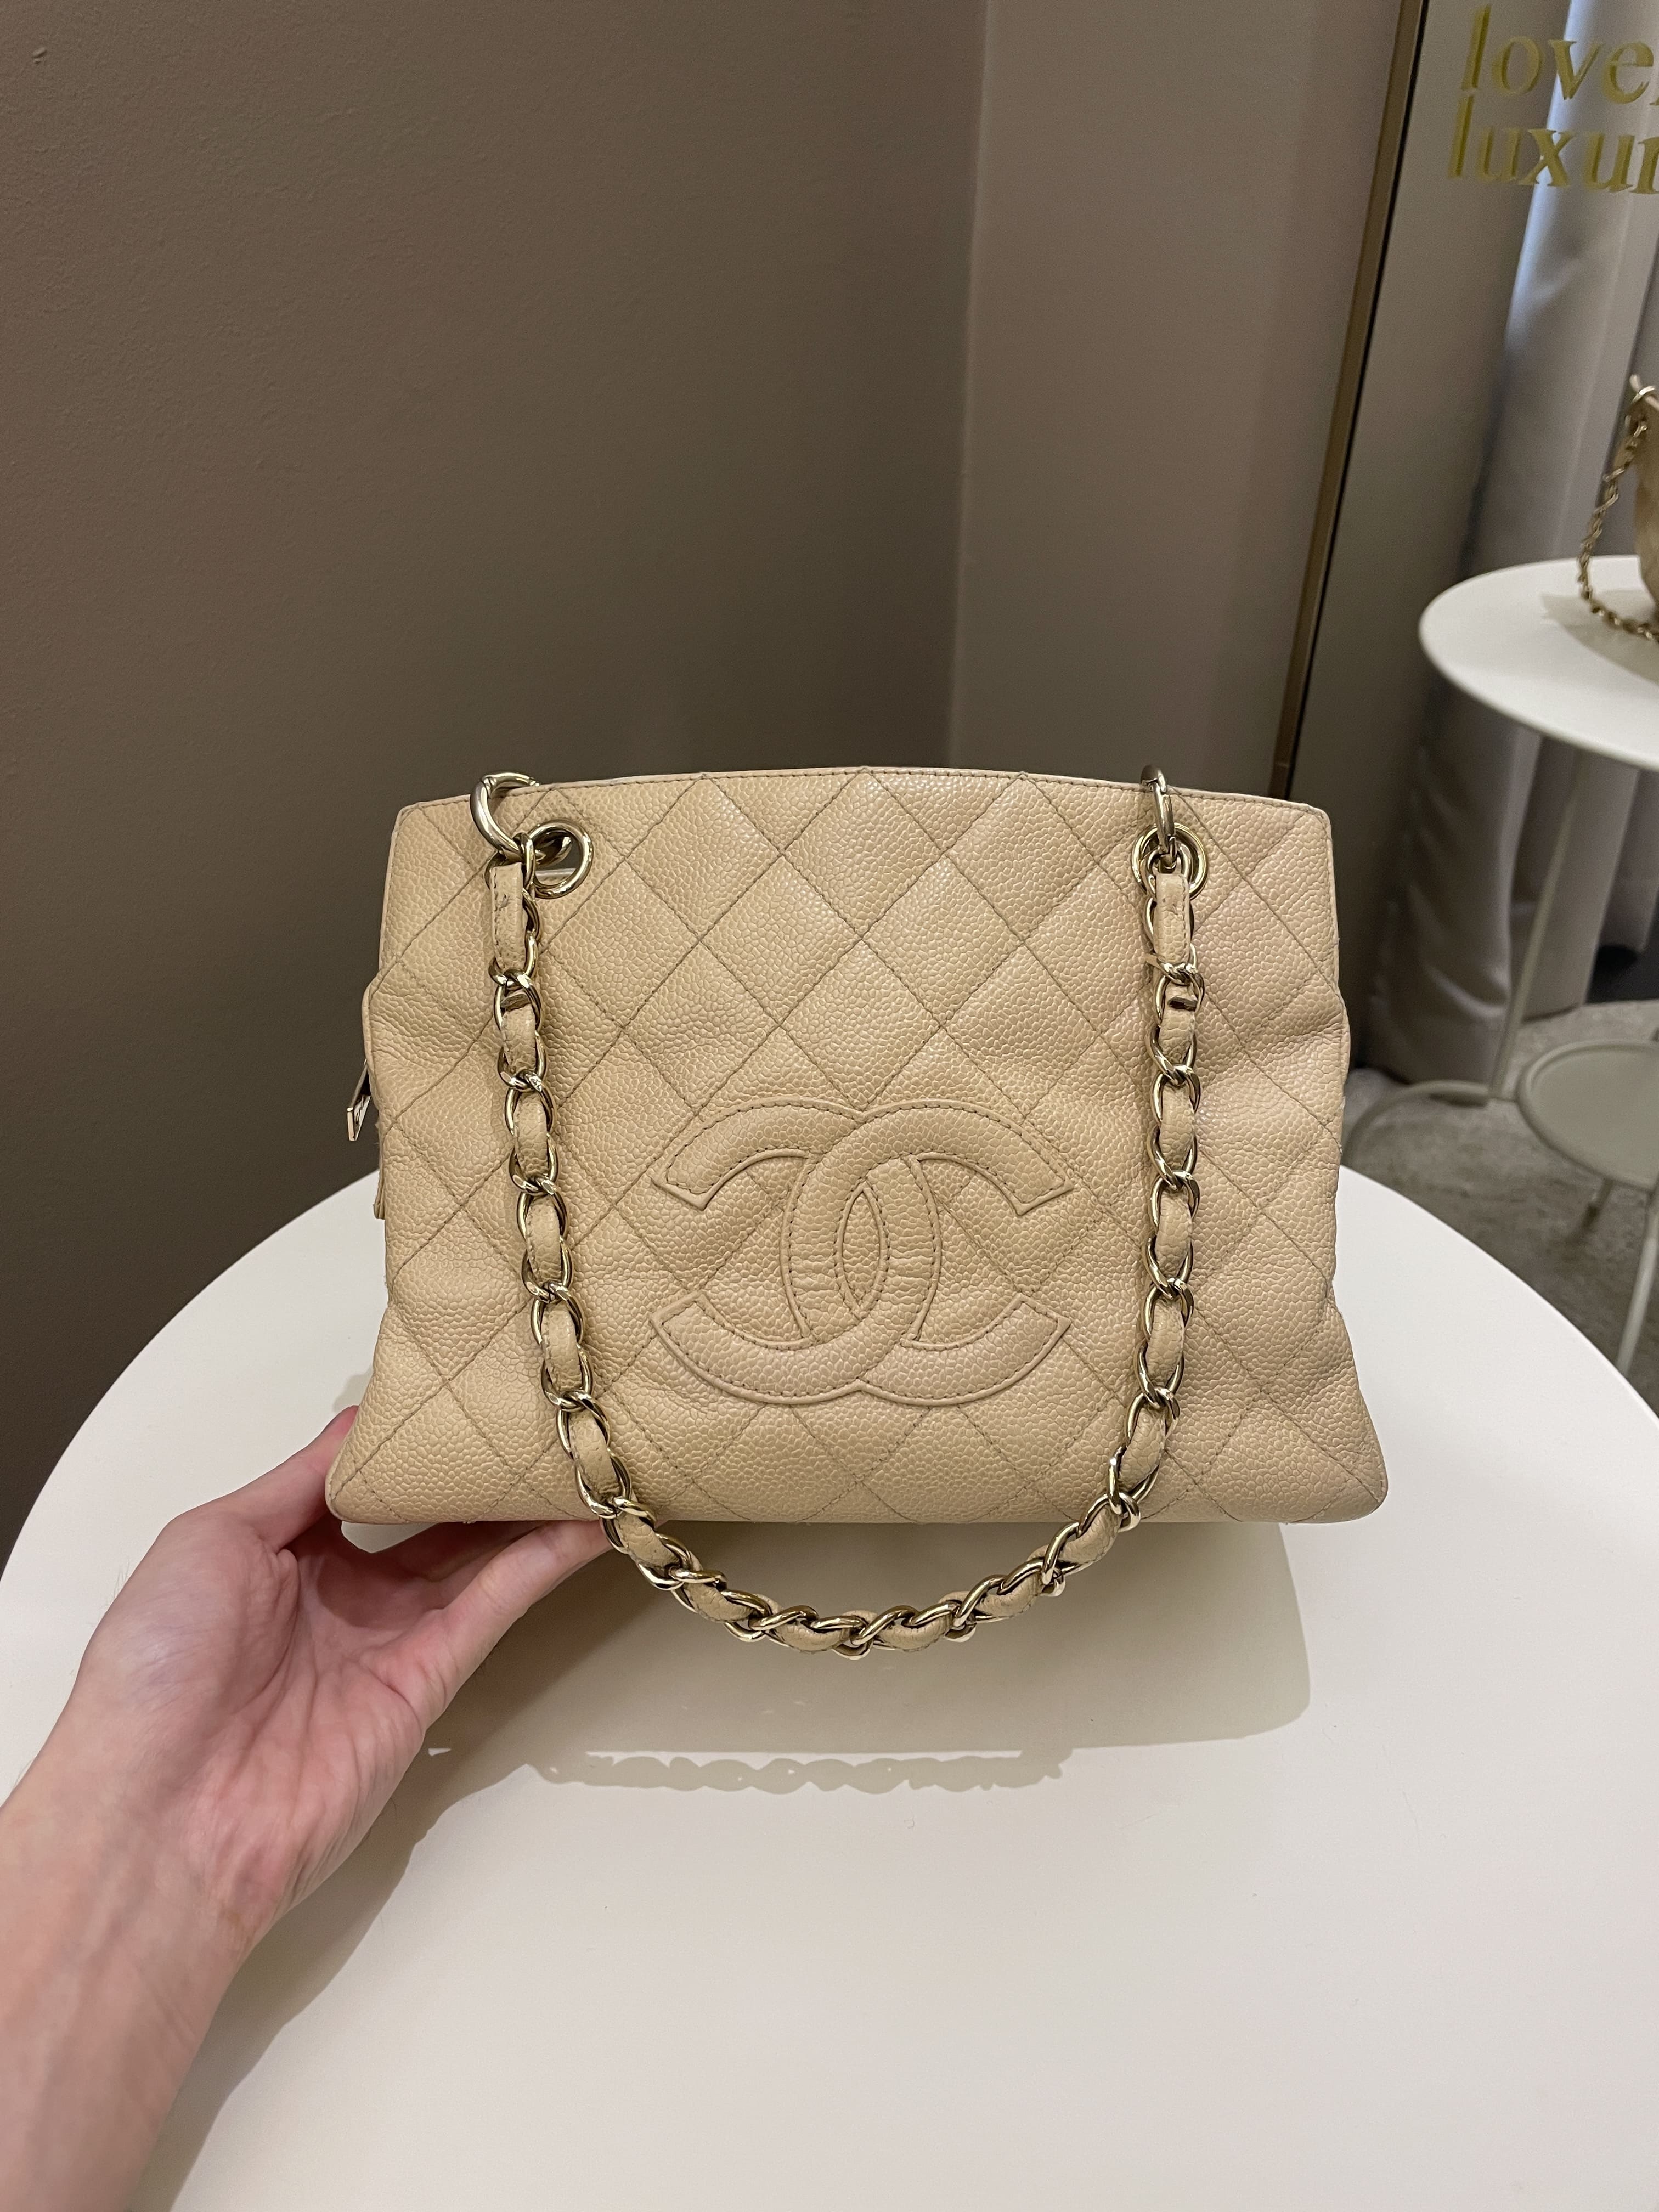 Chanel - Petite Timeless Tote - PTT - Caviar Leather - Pre-Loved